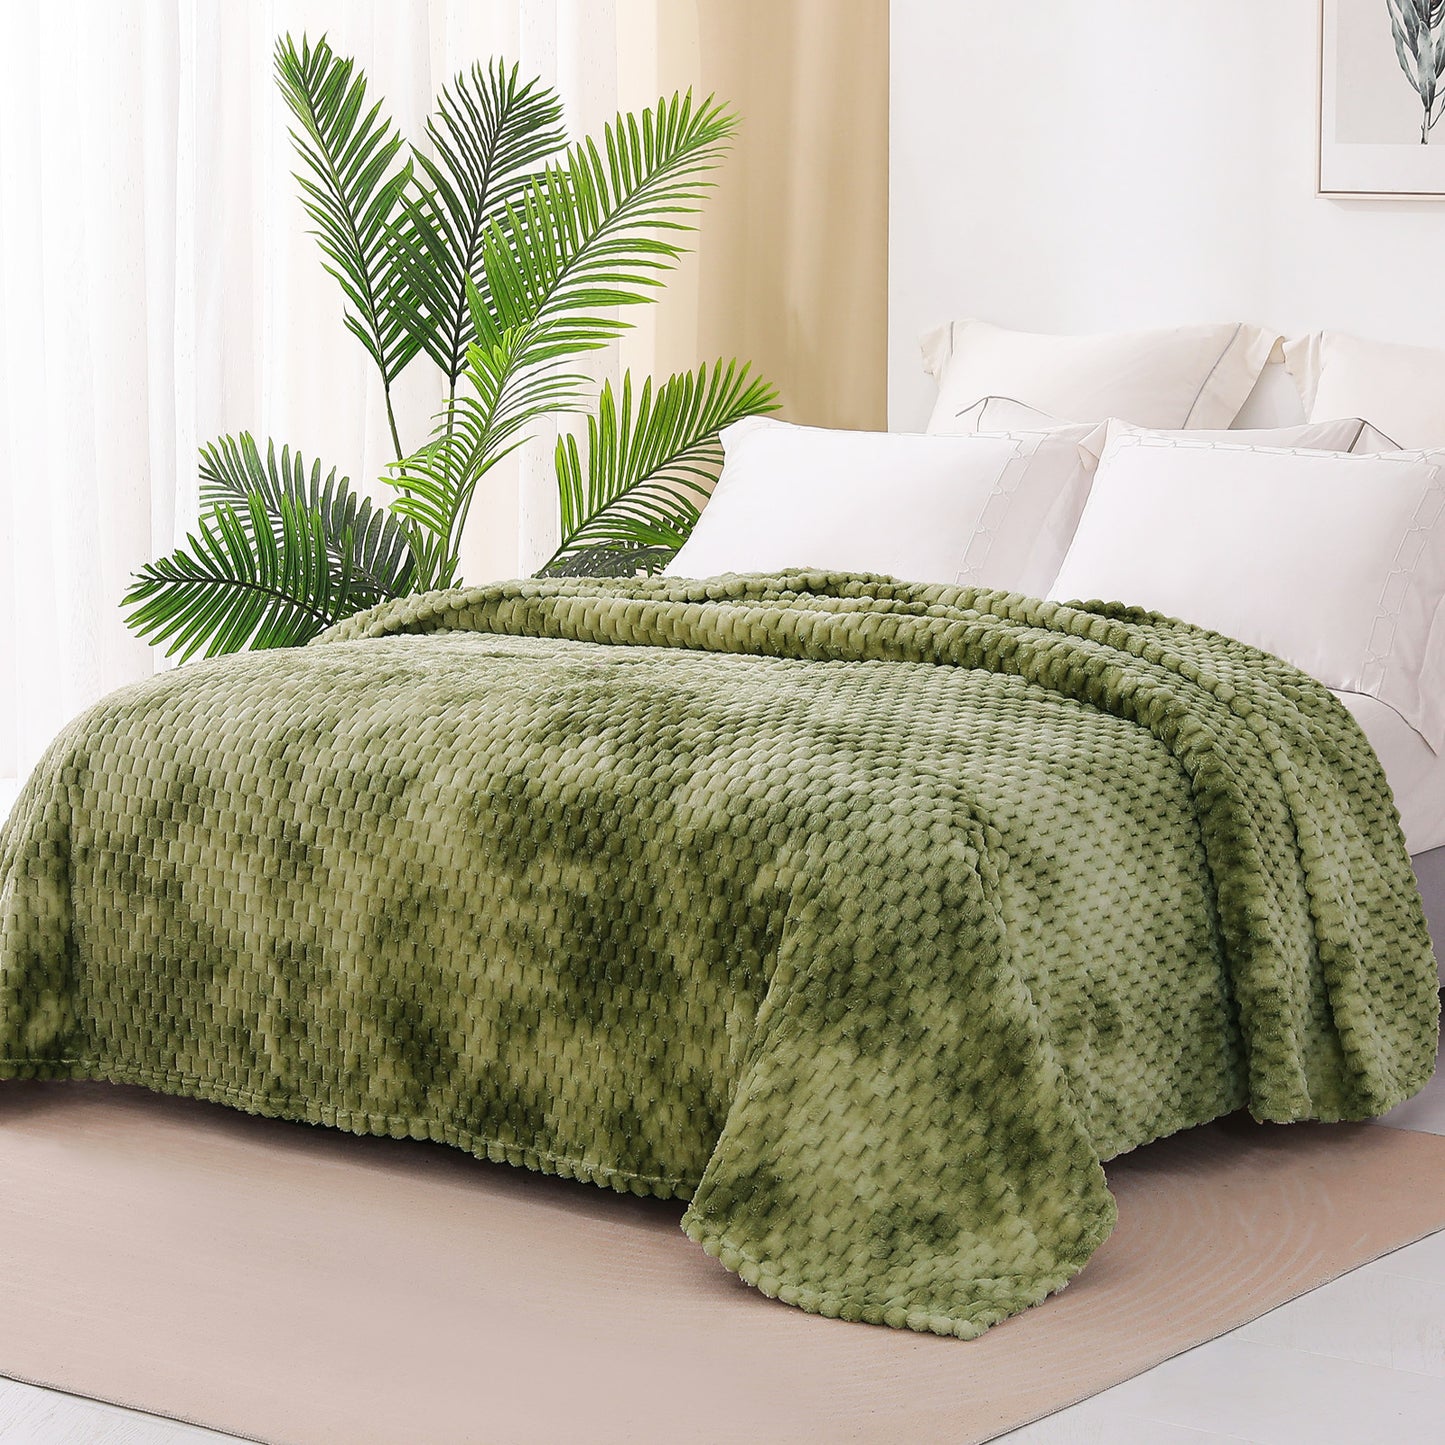 Exclusivo Mezcla Queen Size Flannel Fleece Blanket, 90x90 Inches Stylish Jacquard Velvet Plush Blanket for Bed, Cozy, Warm, Lightweight and Decorative Olive Green Blanket